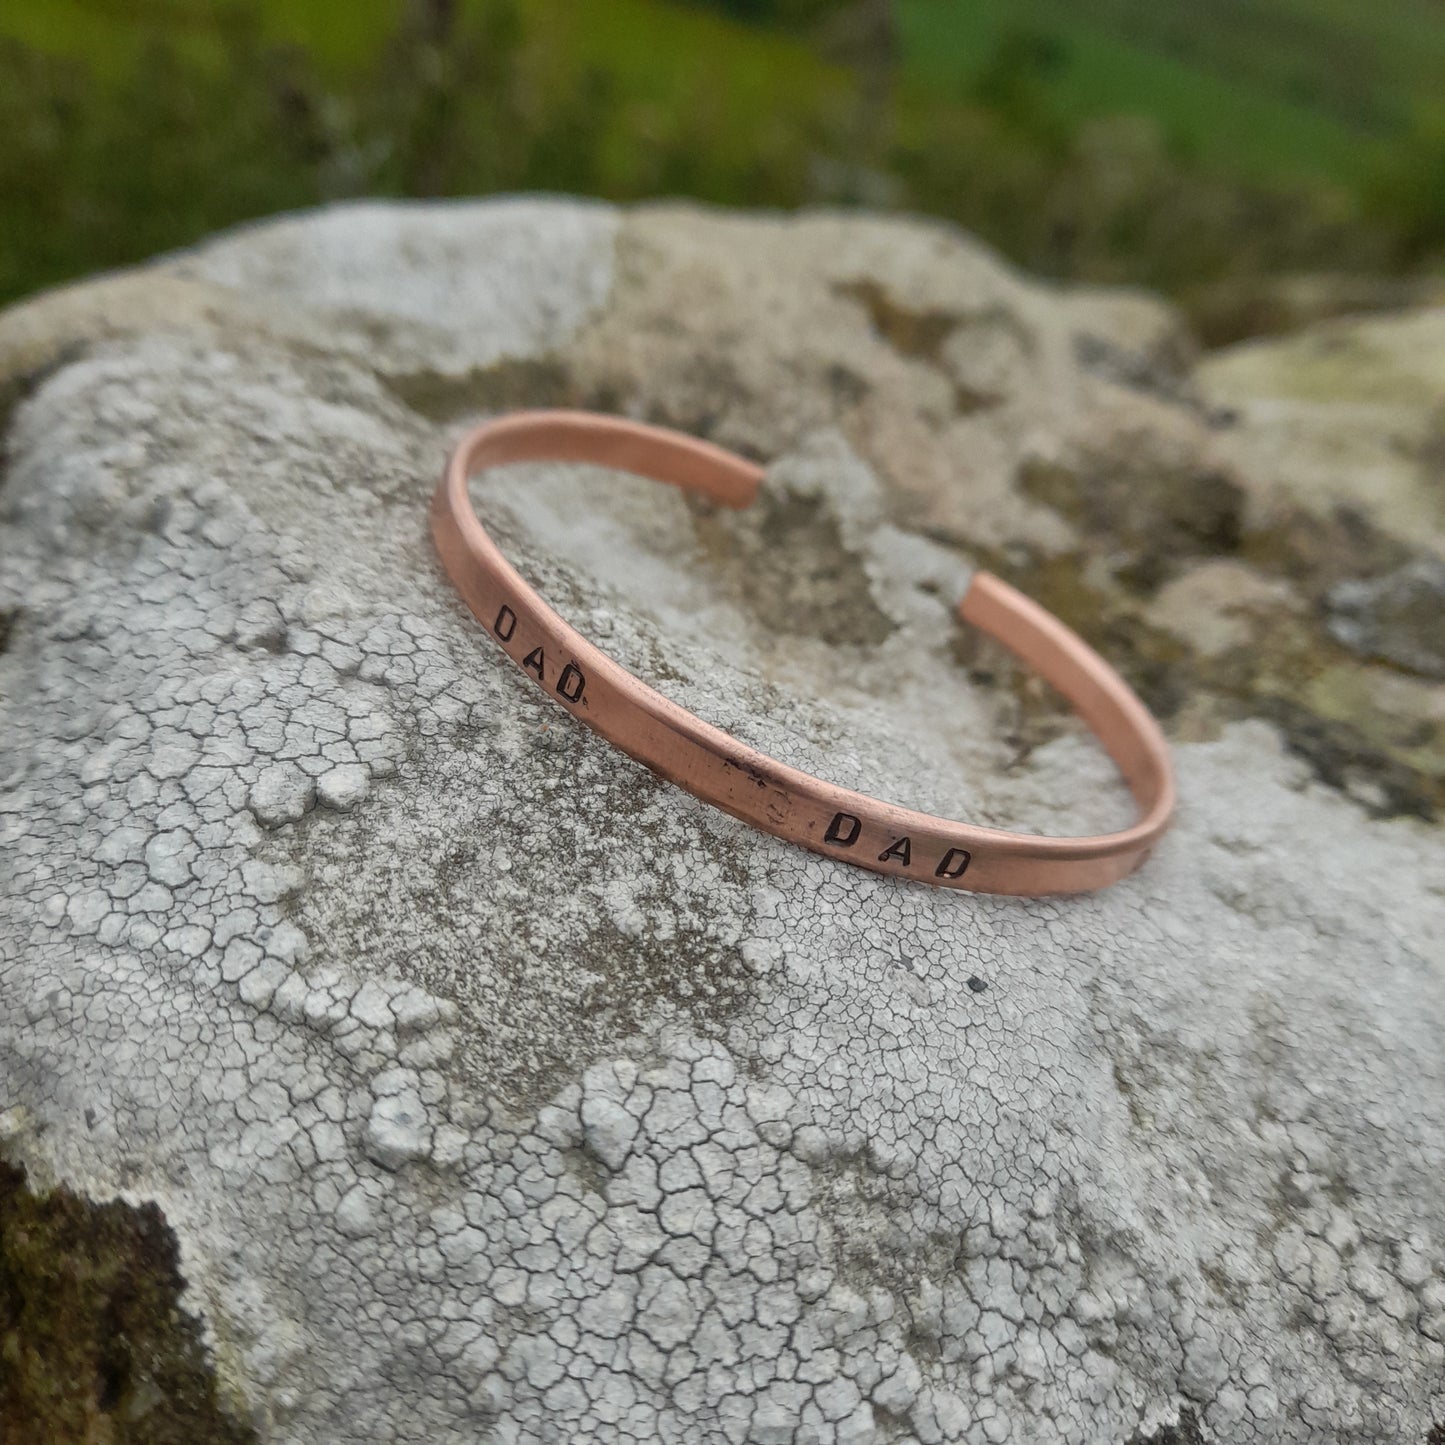 Men's Personalised Bracelet. Dad Personalised Copper Bangle. Men's Copper Bangle for Fathers Day. Copper Torque Bangle.